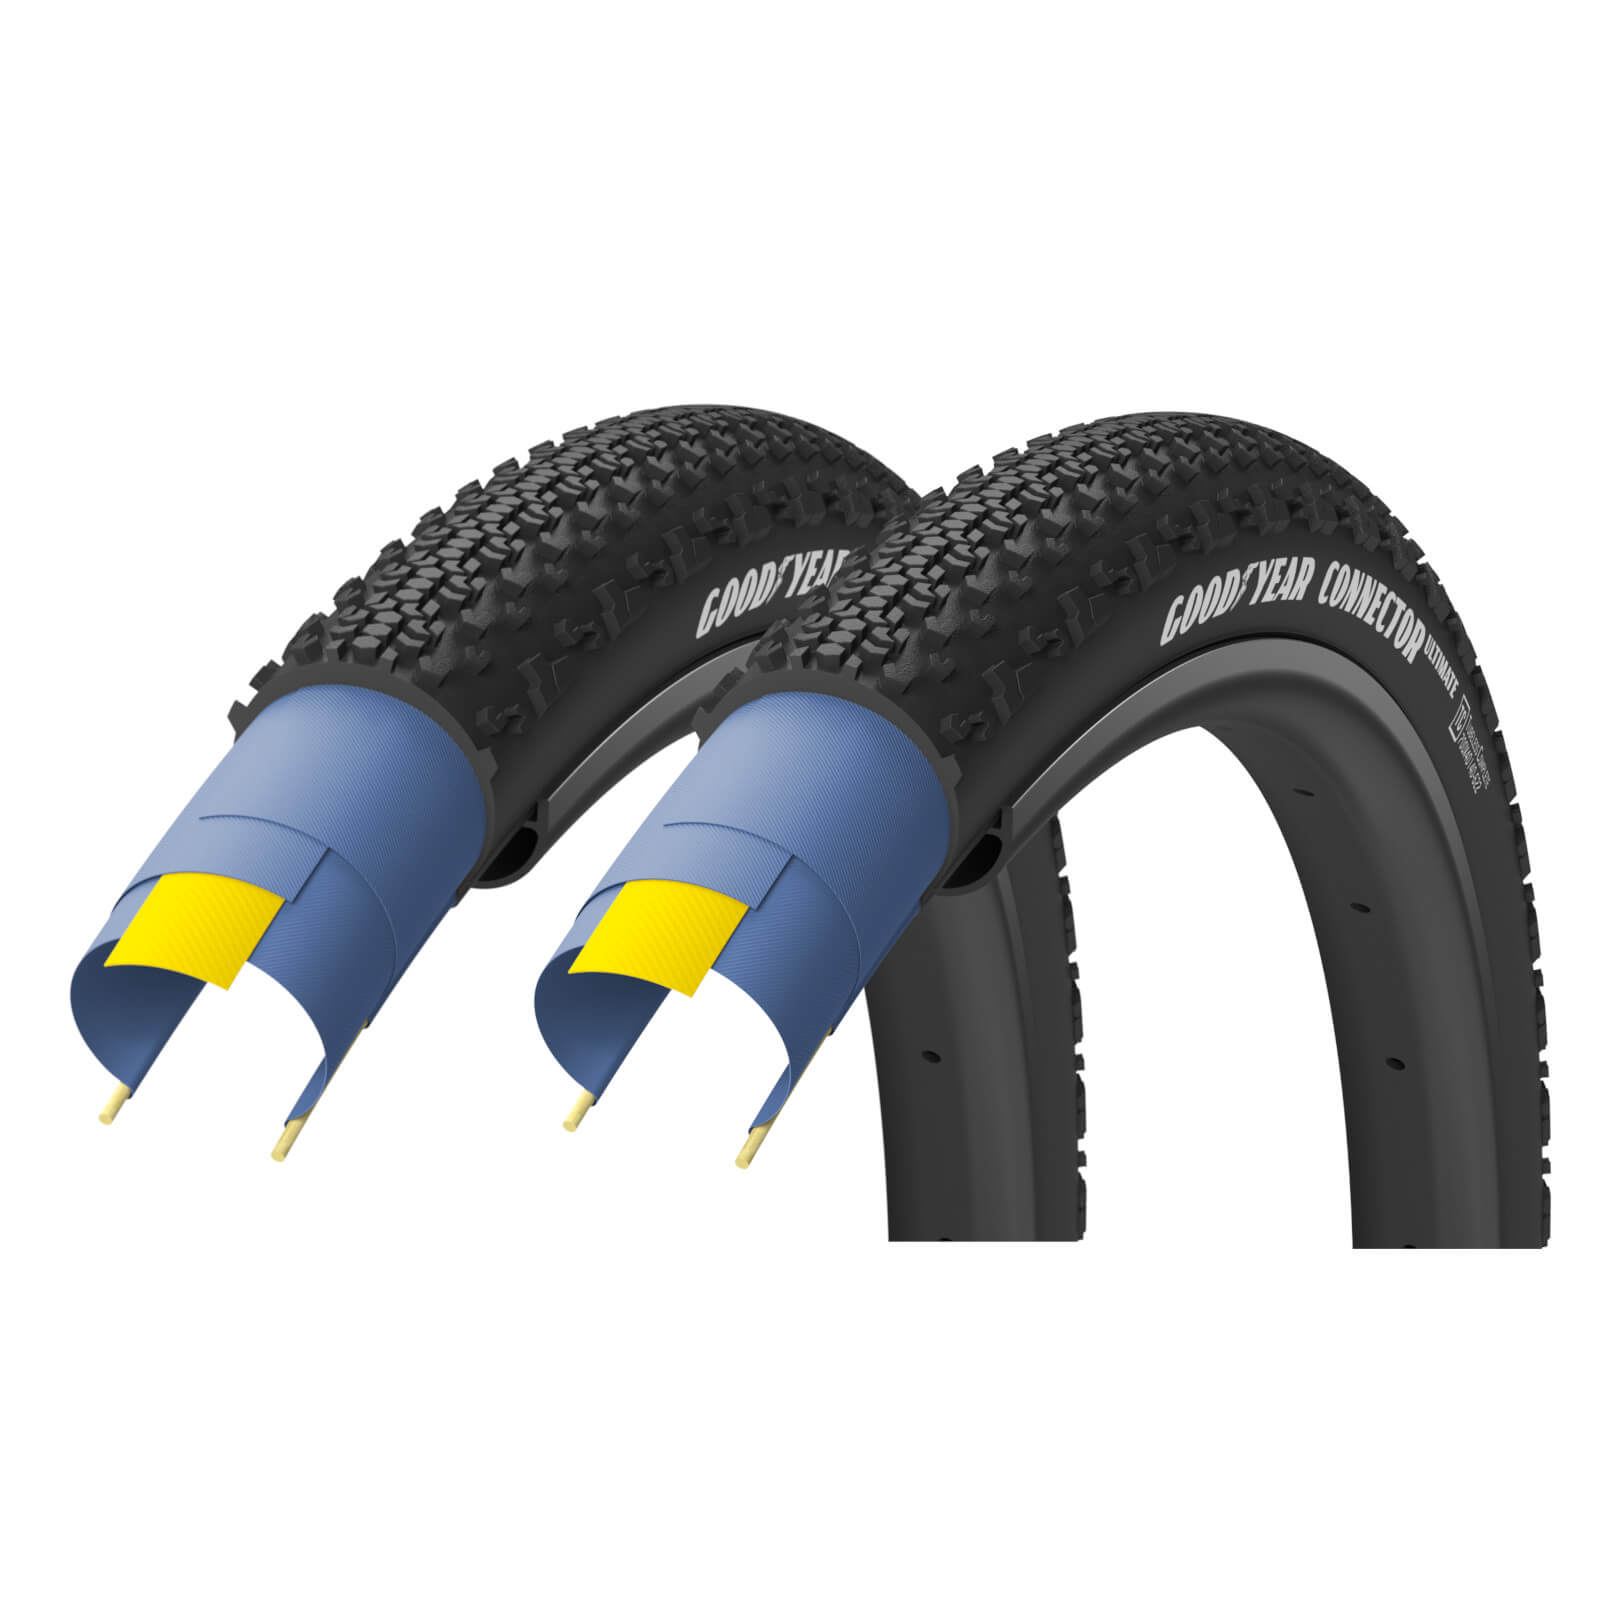 Goodyear Connector Ultimate A/T Tubeless Gravel Tyre Twin Pack - 700c x 40mm - Black